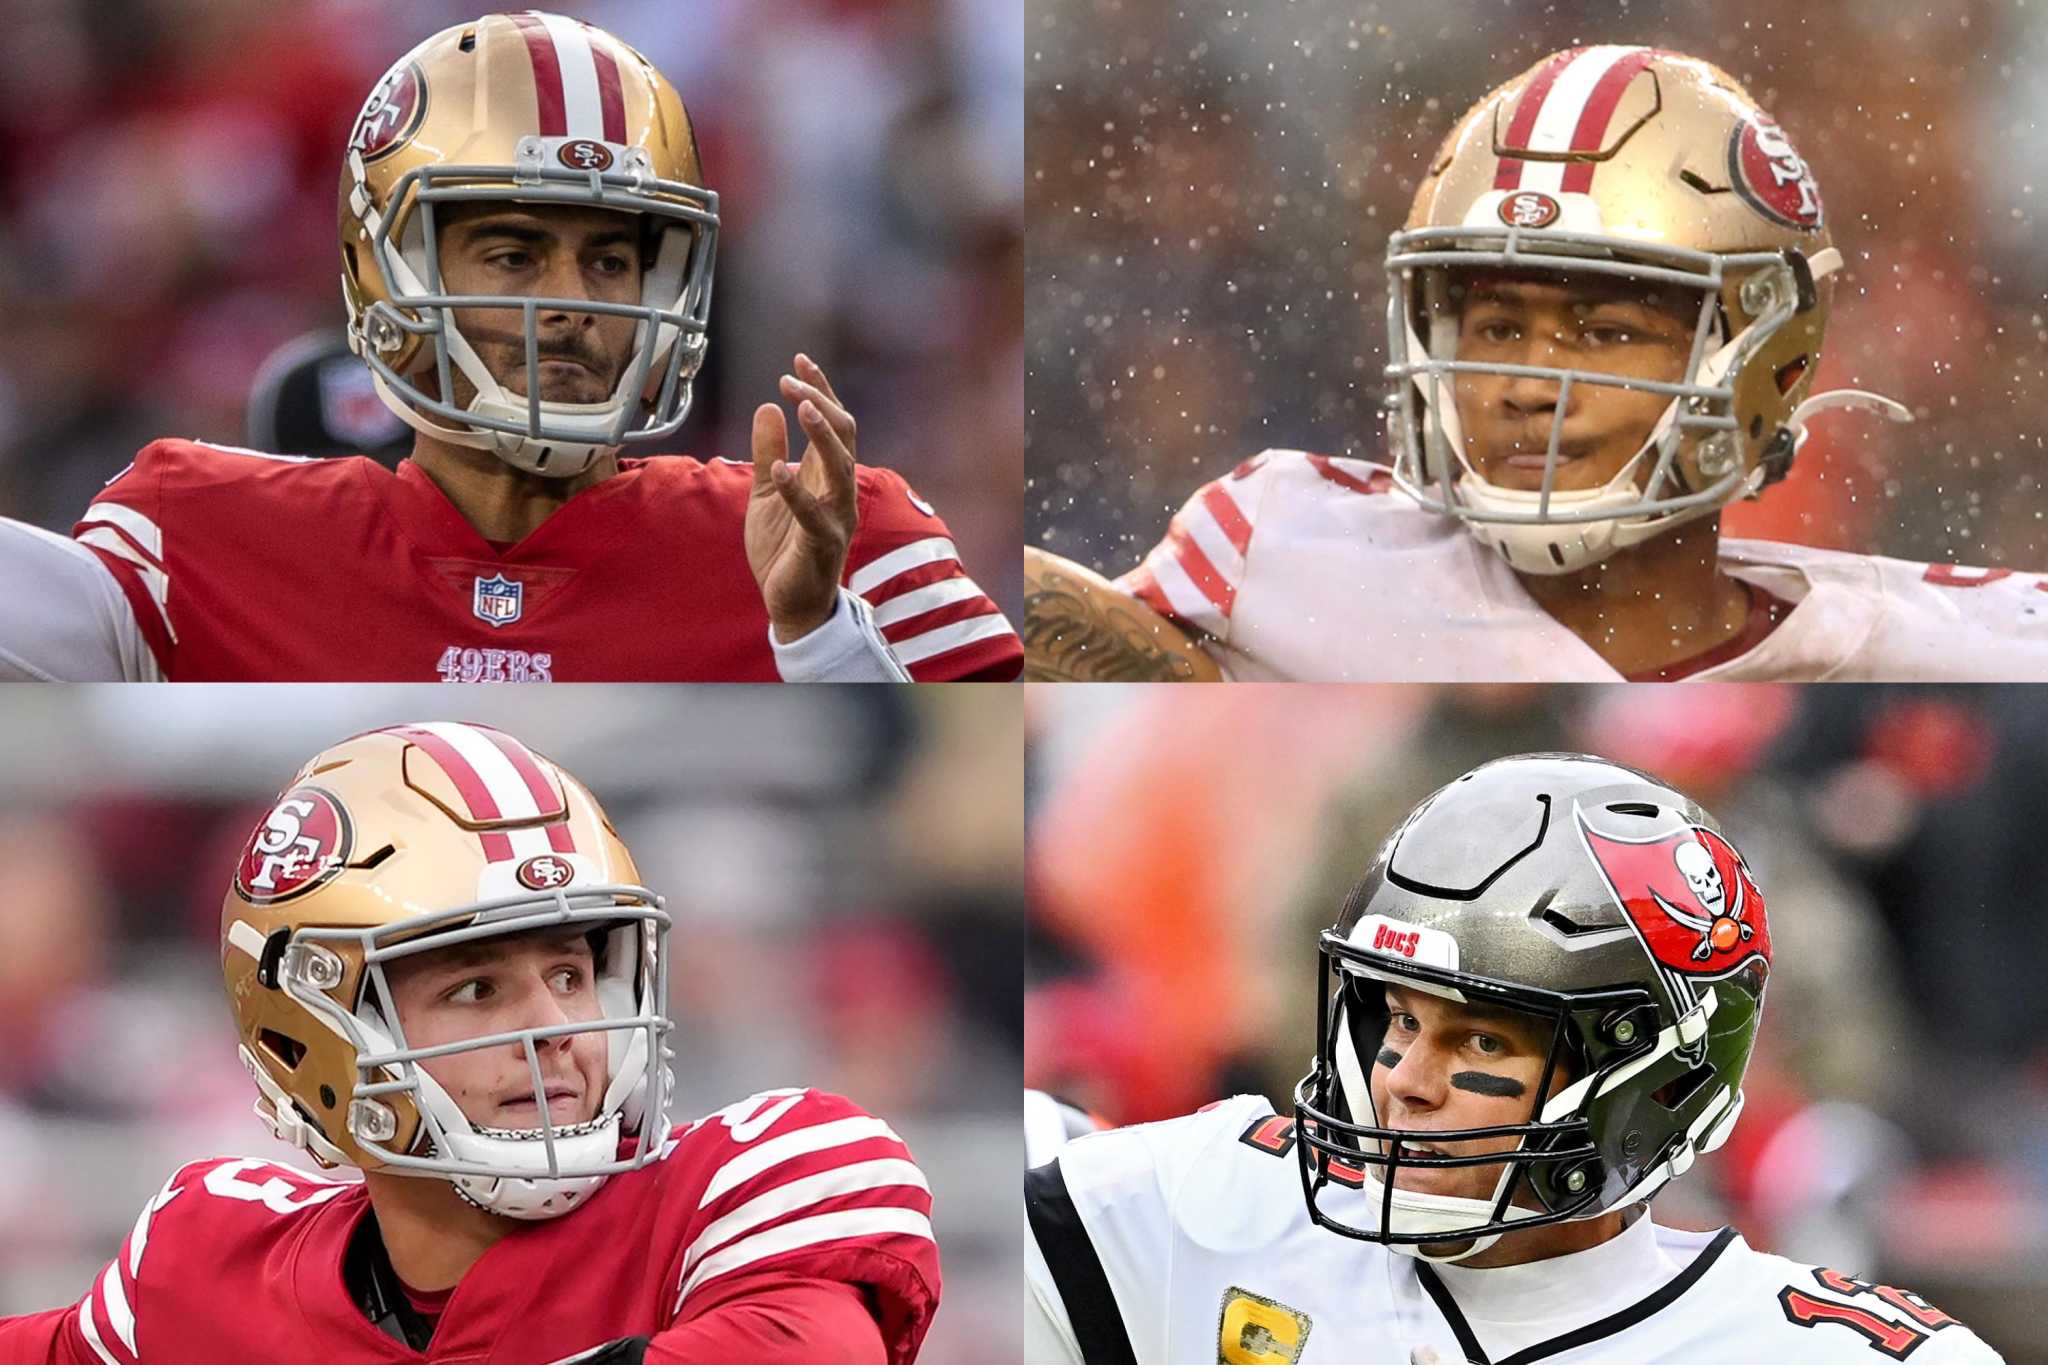 Kicking off the season, Measuring up against the 49ers